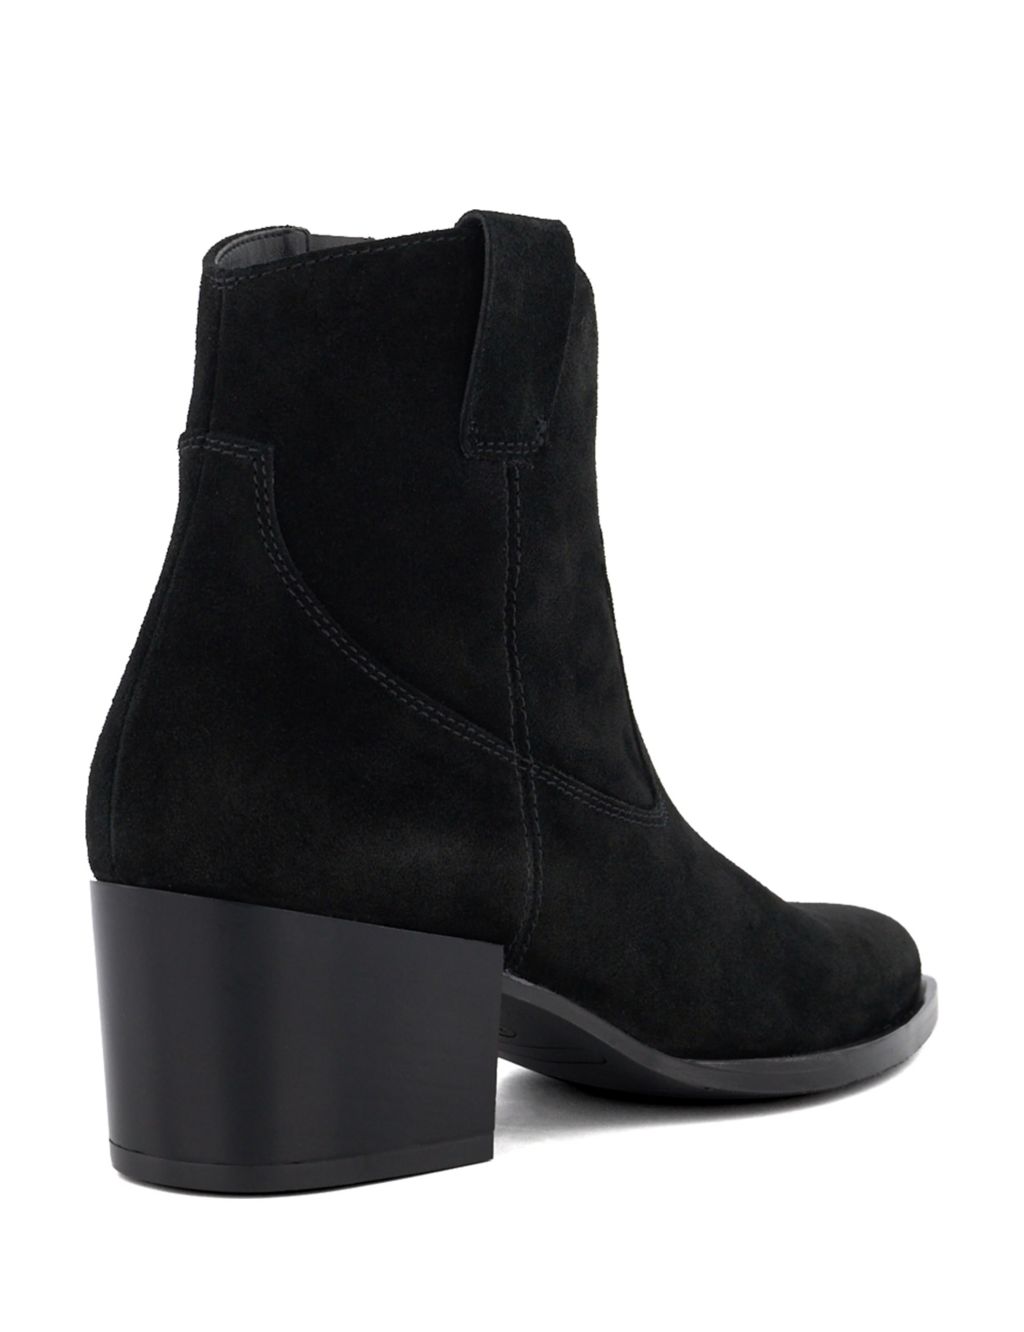 Suede Cow Boy Block Heel Ankle Boots 2 of 4